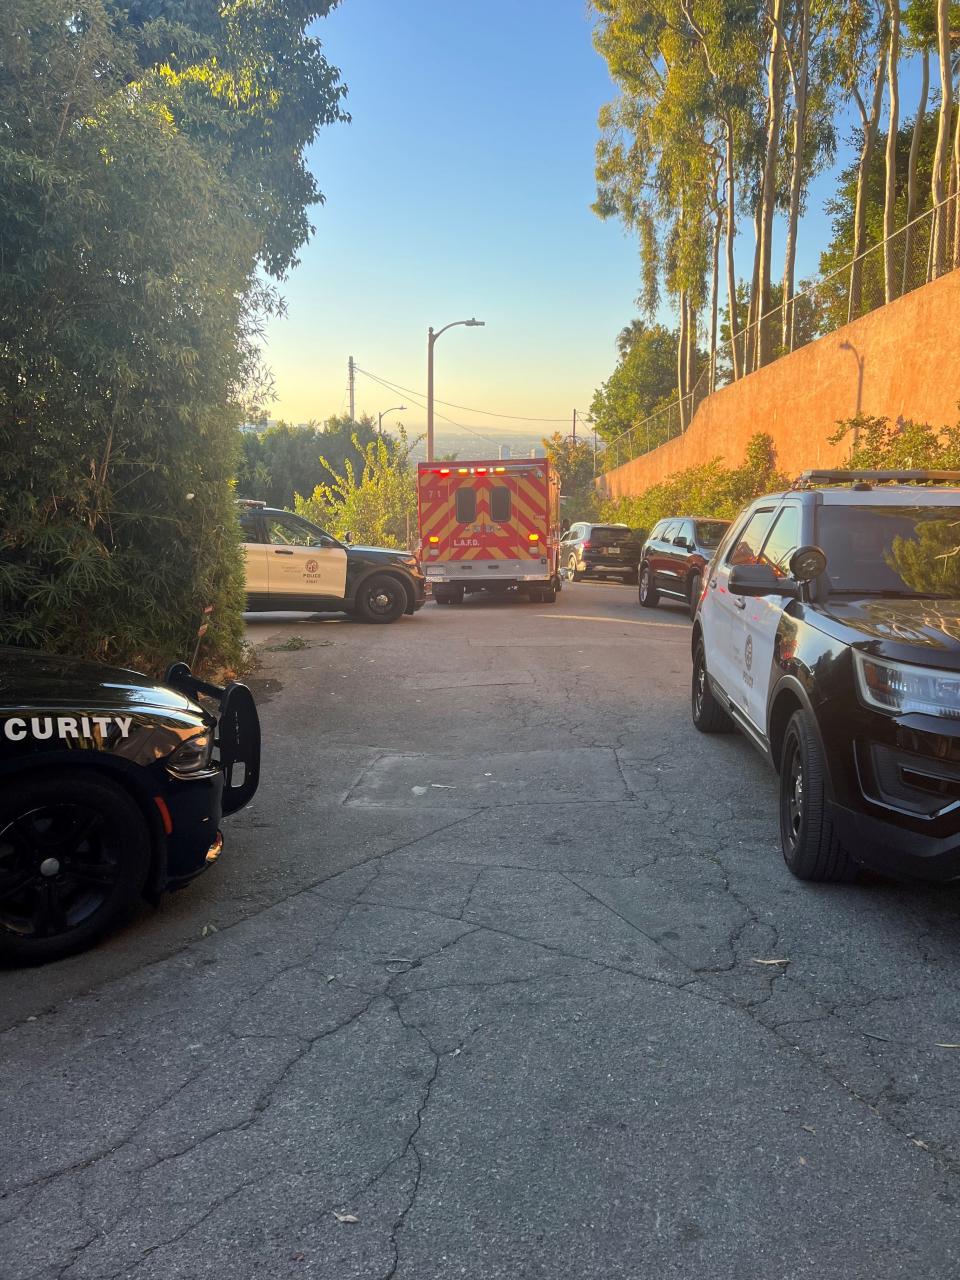 Police and EMT outside the property in Beverly Hills, Los Angeles that has allegedly been taken over by a group of squatters.